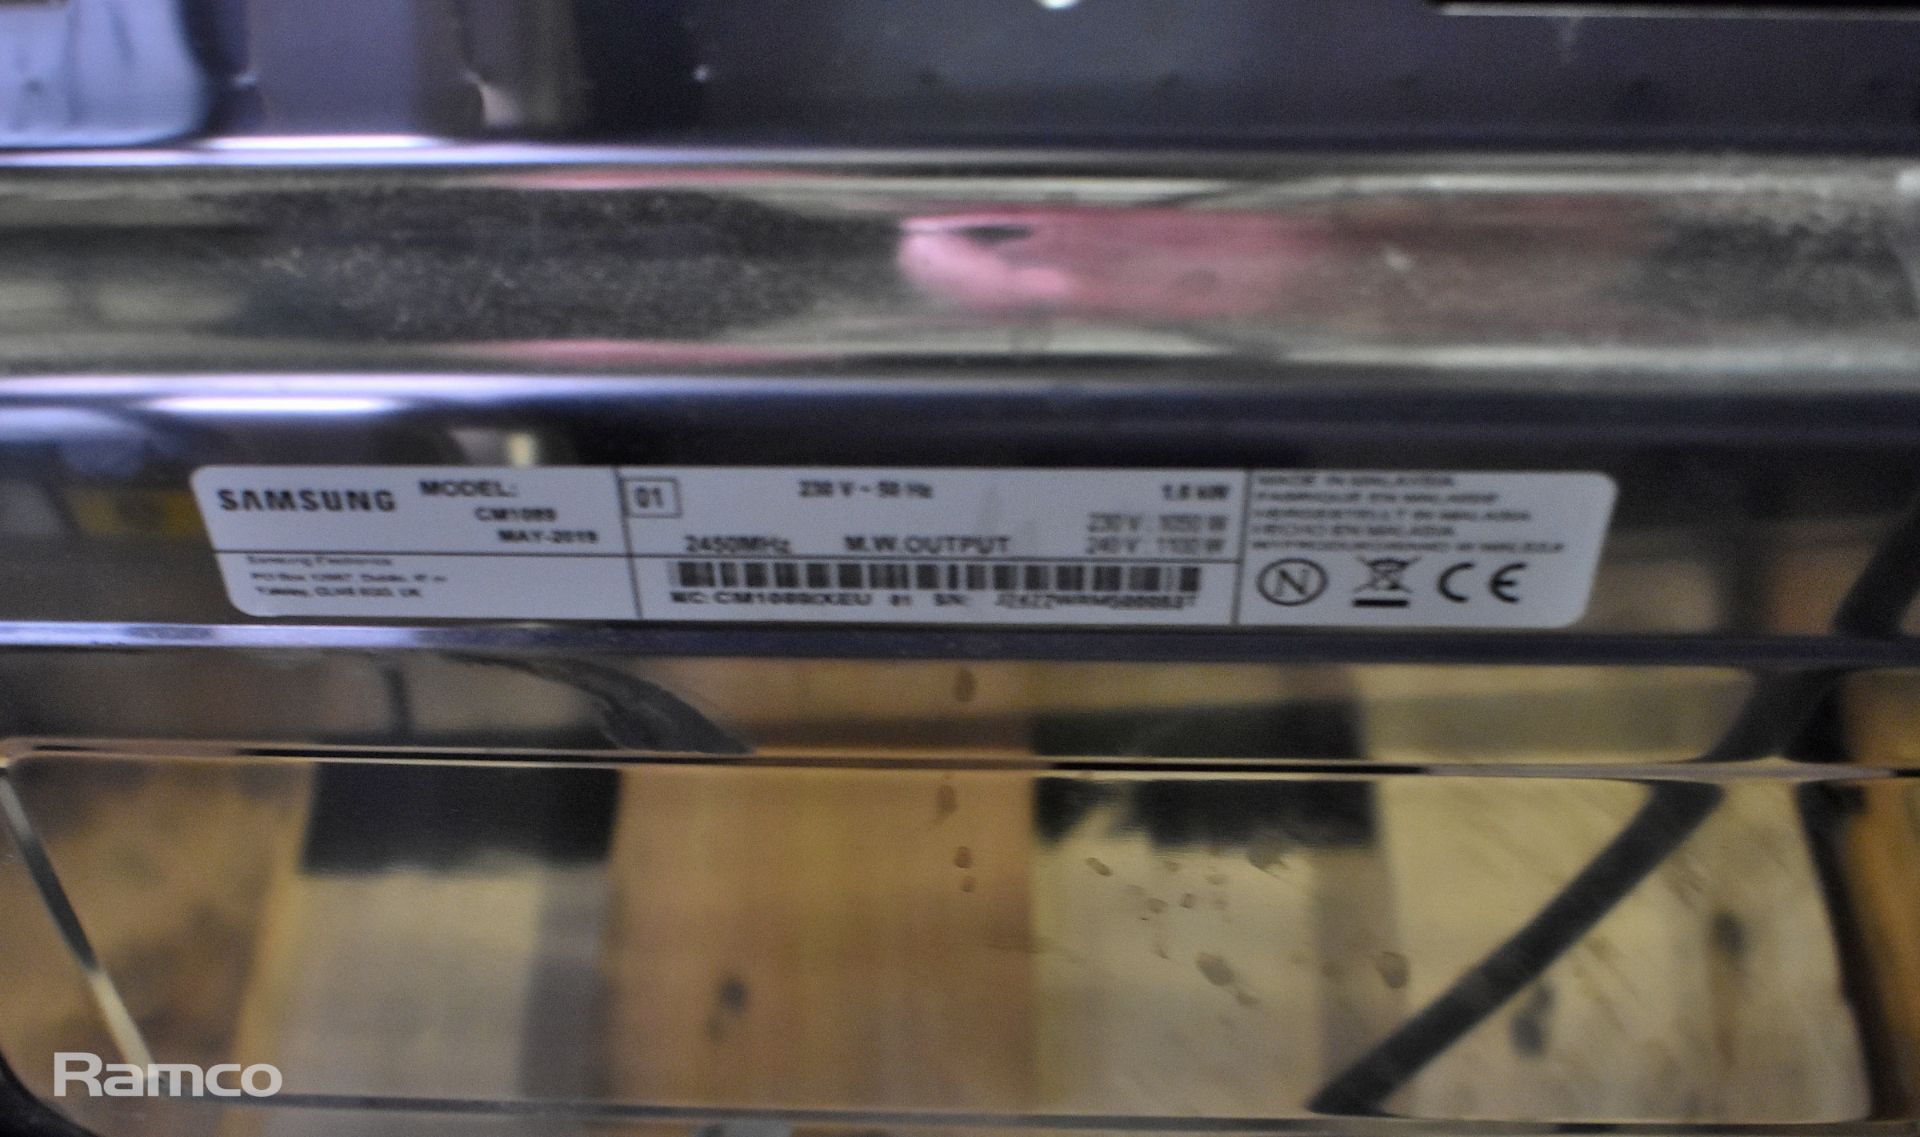 Samsung CM1089 1100W commercial microwave - Image 4 of 4